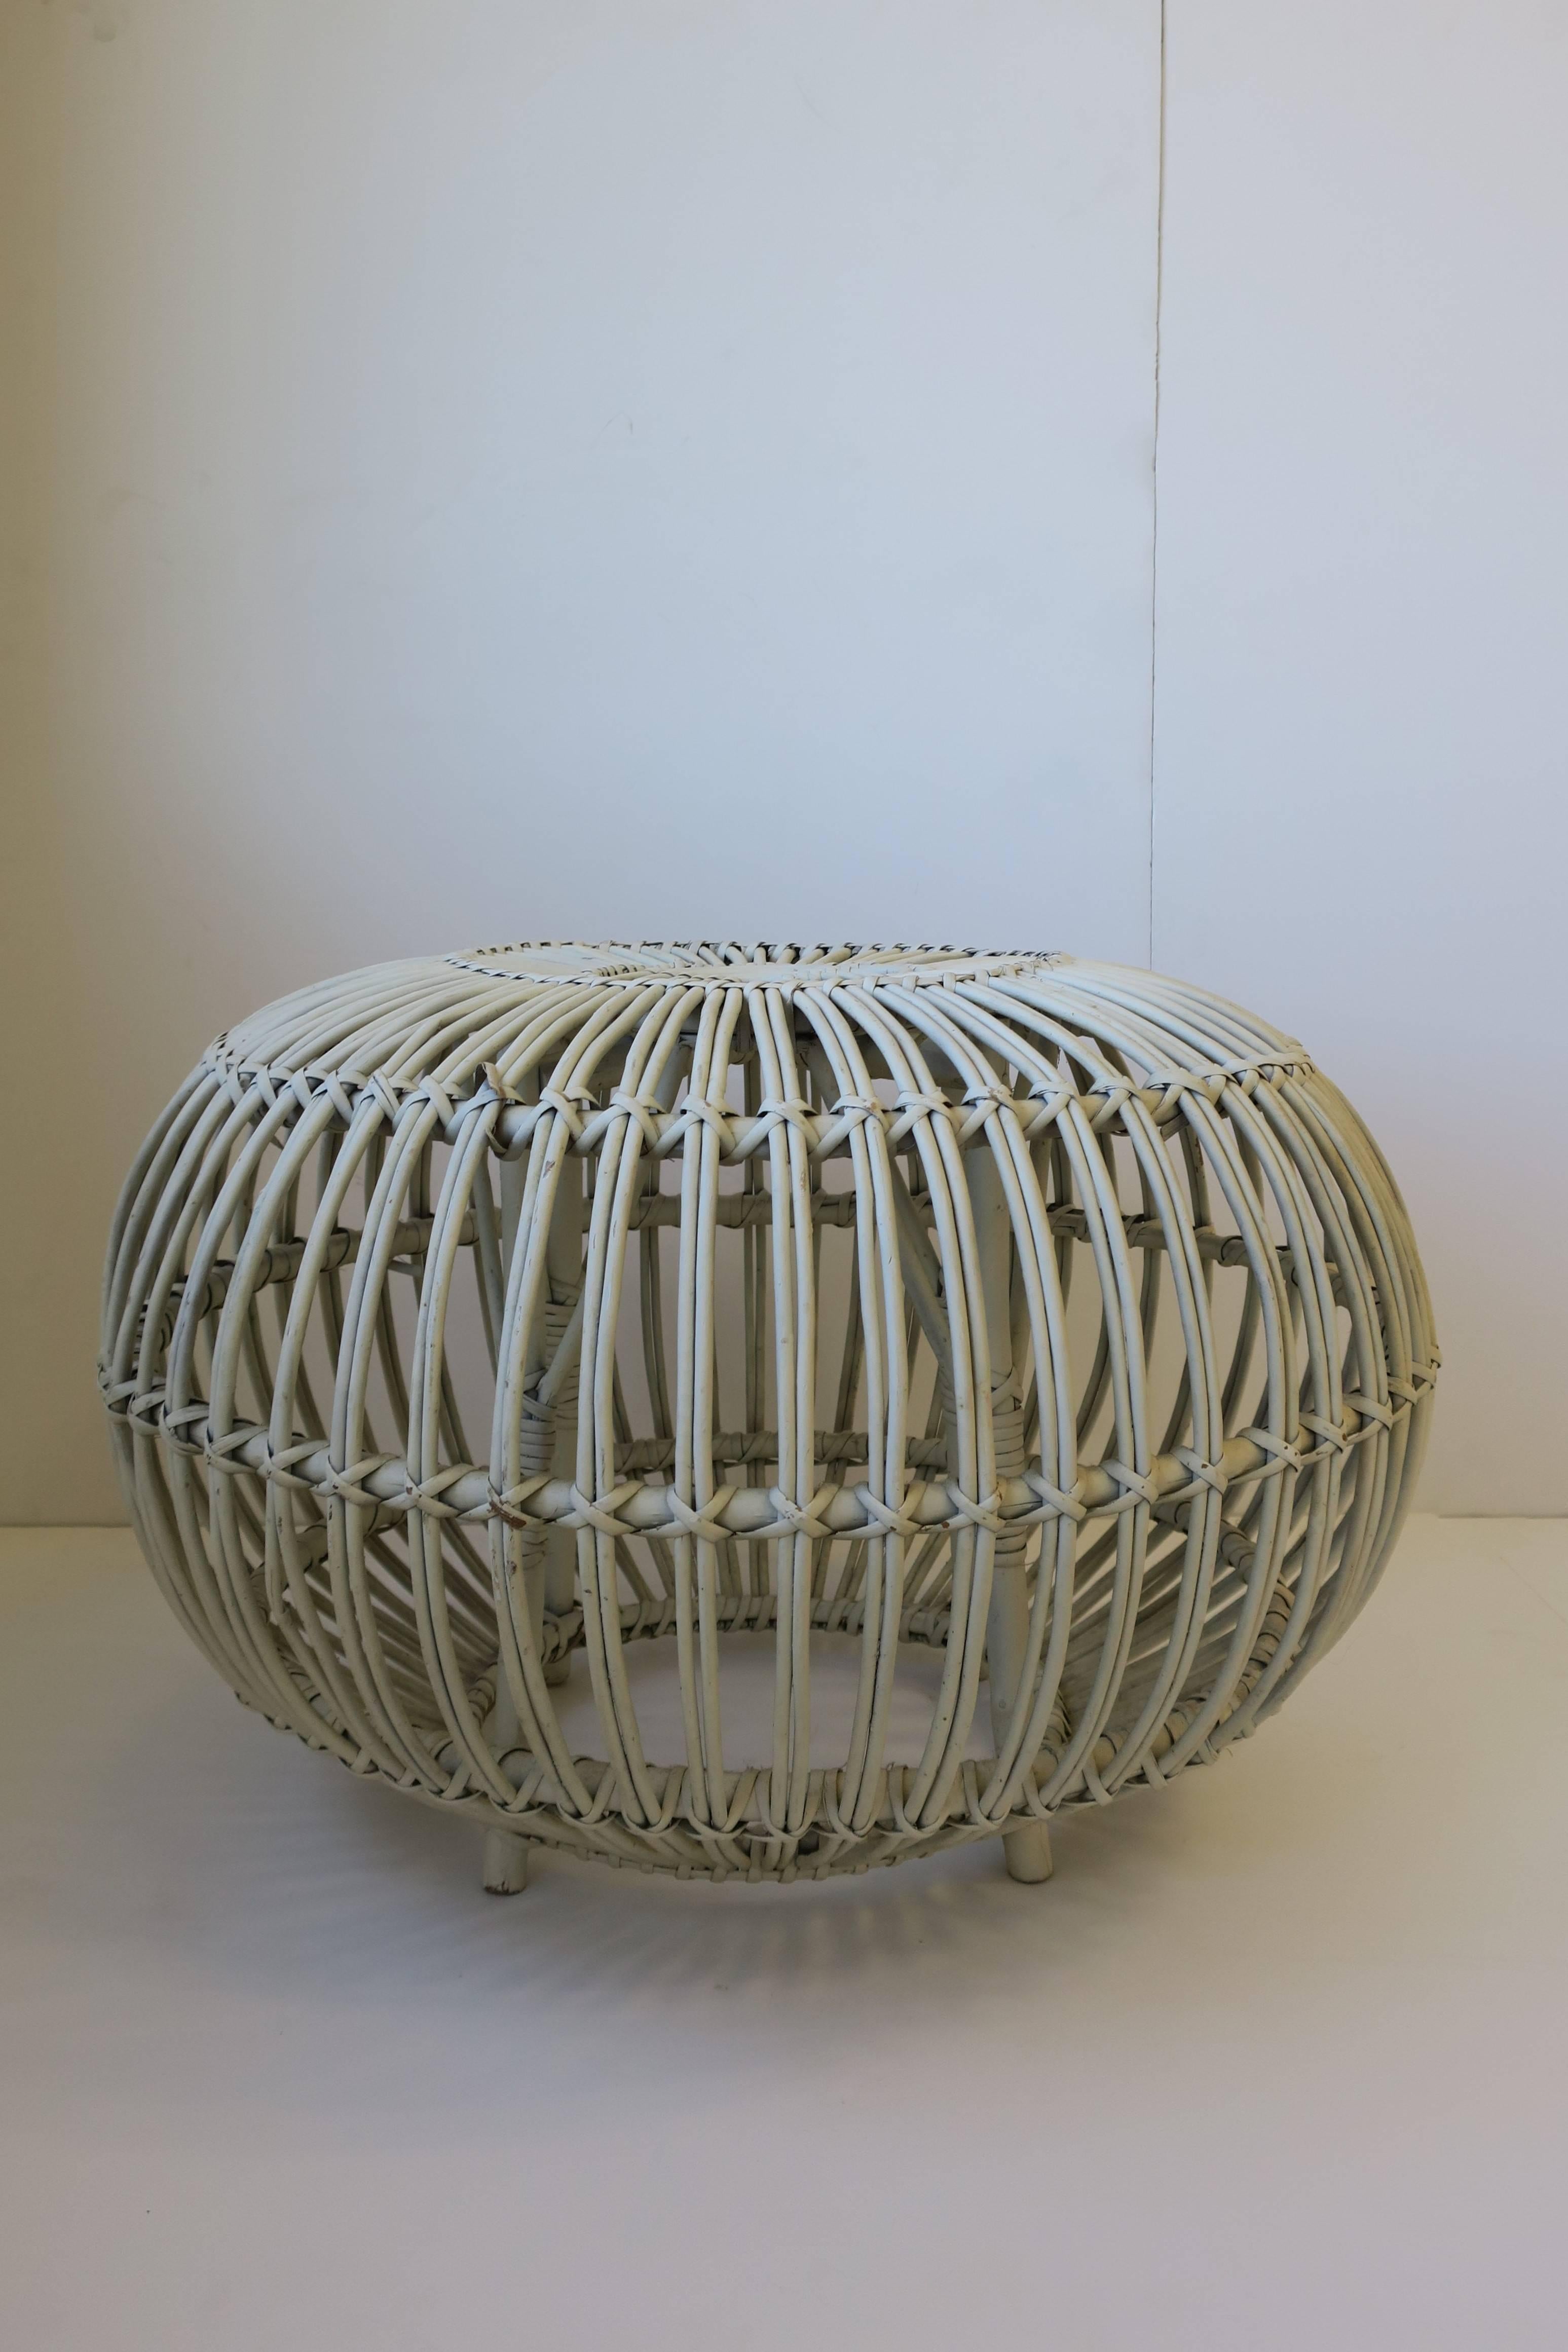 A Mid-Century round white rattan stool or side table by designer Franco Albini. Piece can work as a stool/round bench, footstool, pouf/ottoman, or as a side table providing there is a book, tray, or glass top in place. Shown with book and coral in